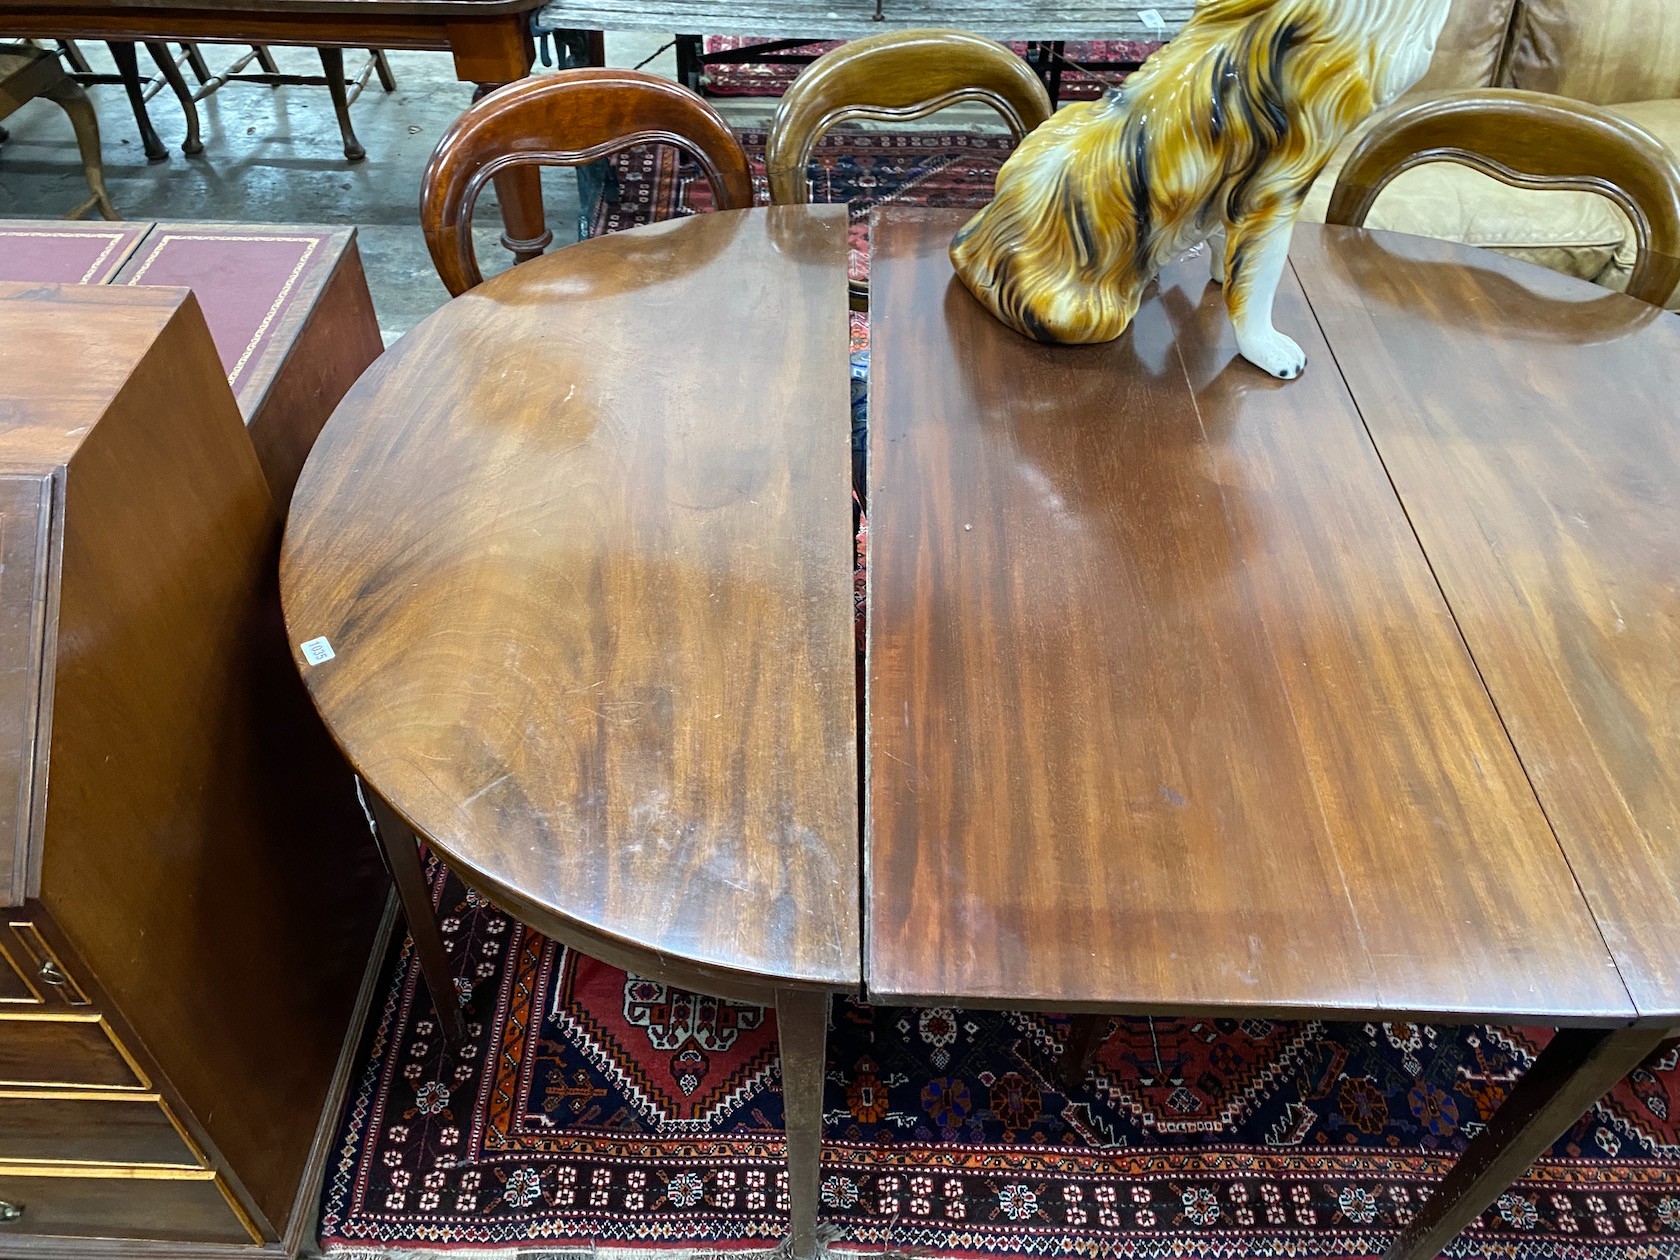 A George III mahogany D end extending dining table with later drop leaf, 180cm extended, depth 127cm, height 74cm